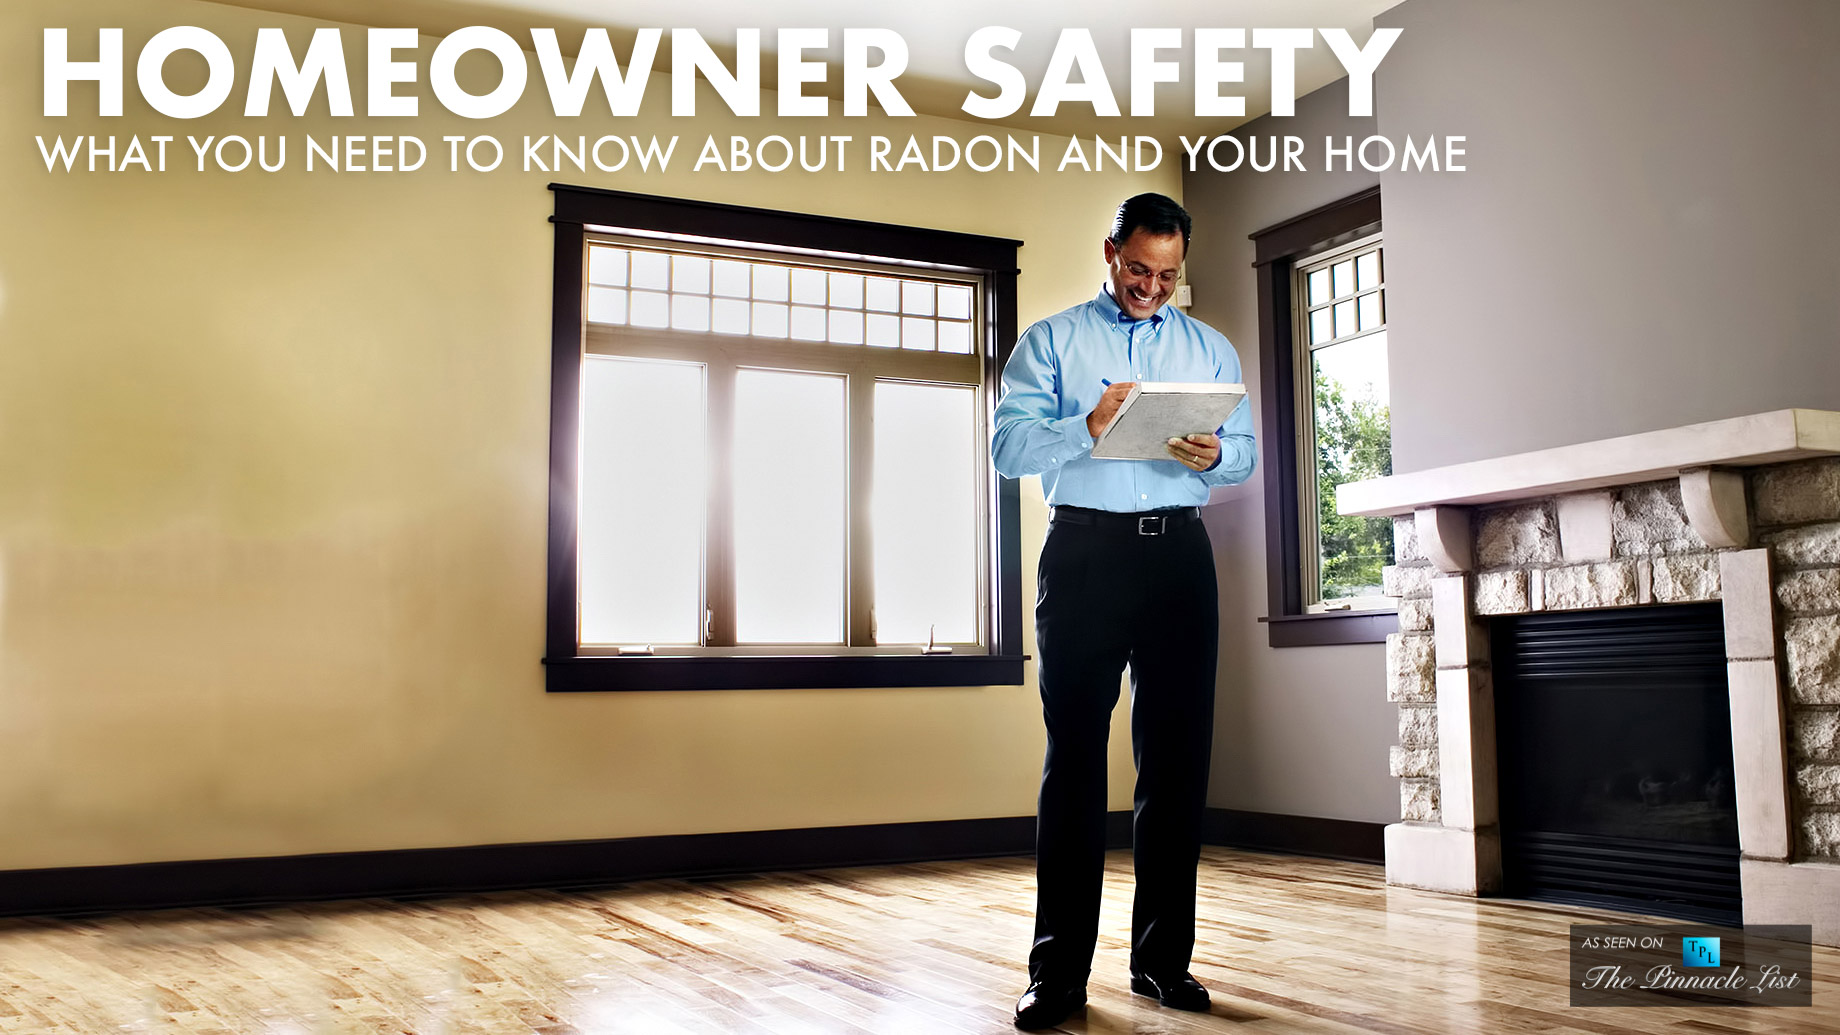 Homeowner Safety - What You Need to Know About Radon and Your Home